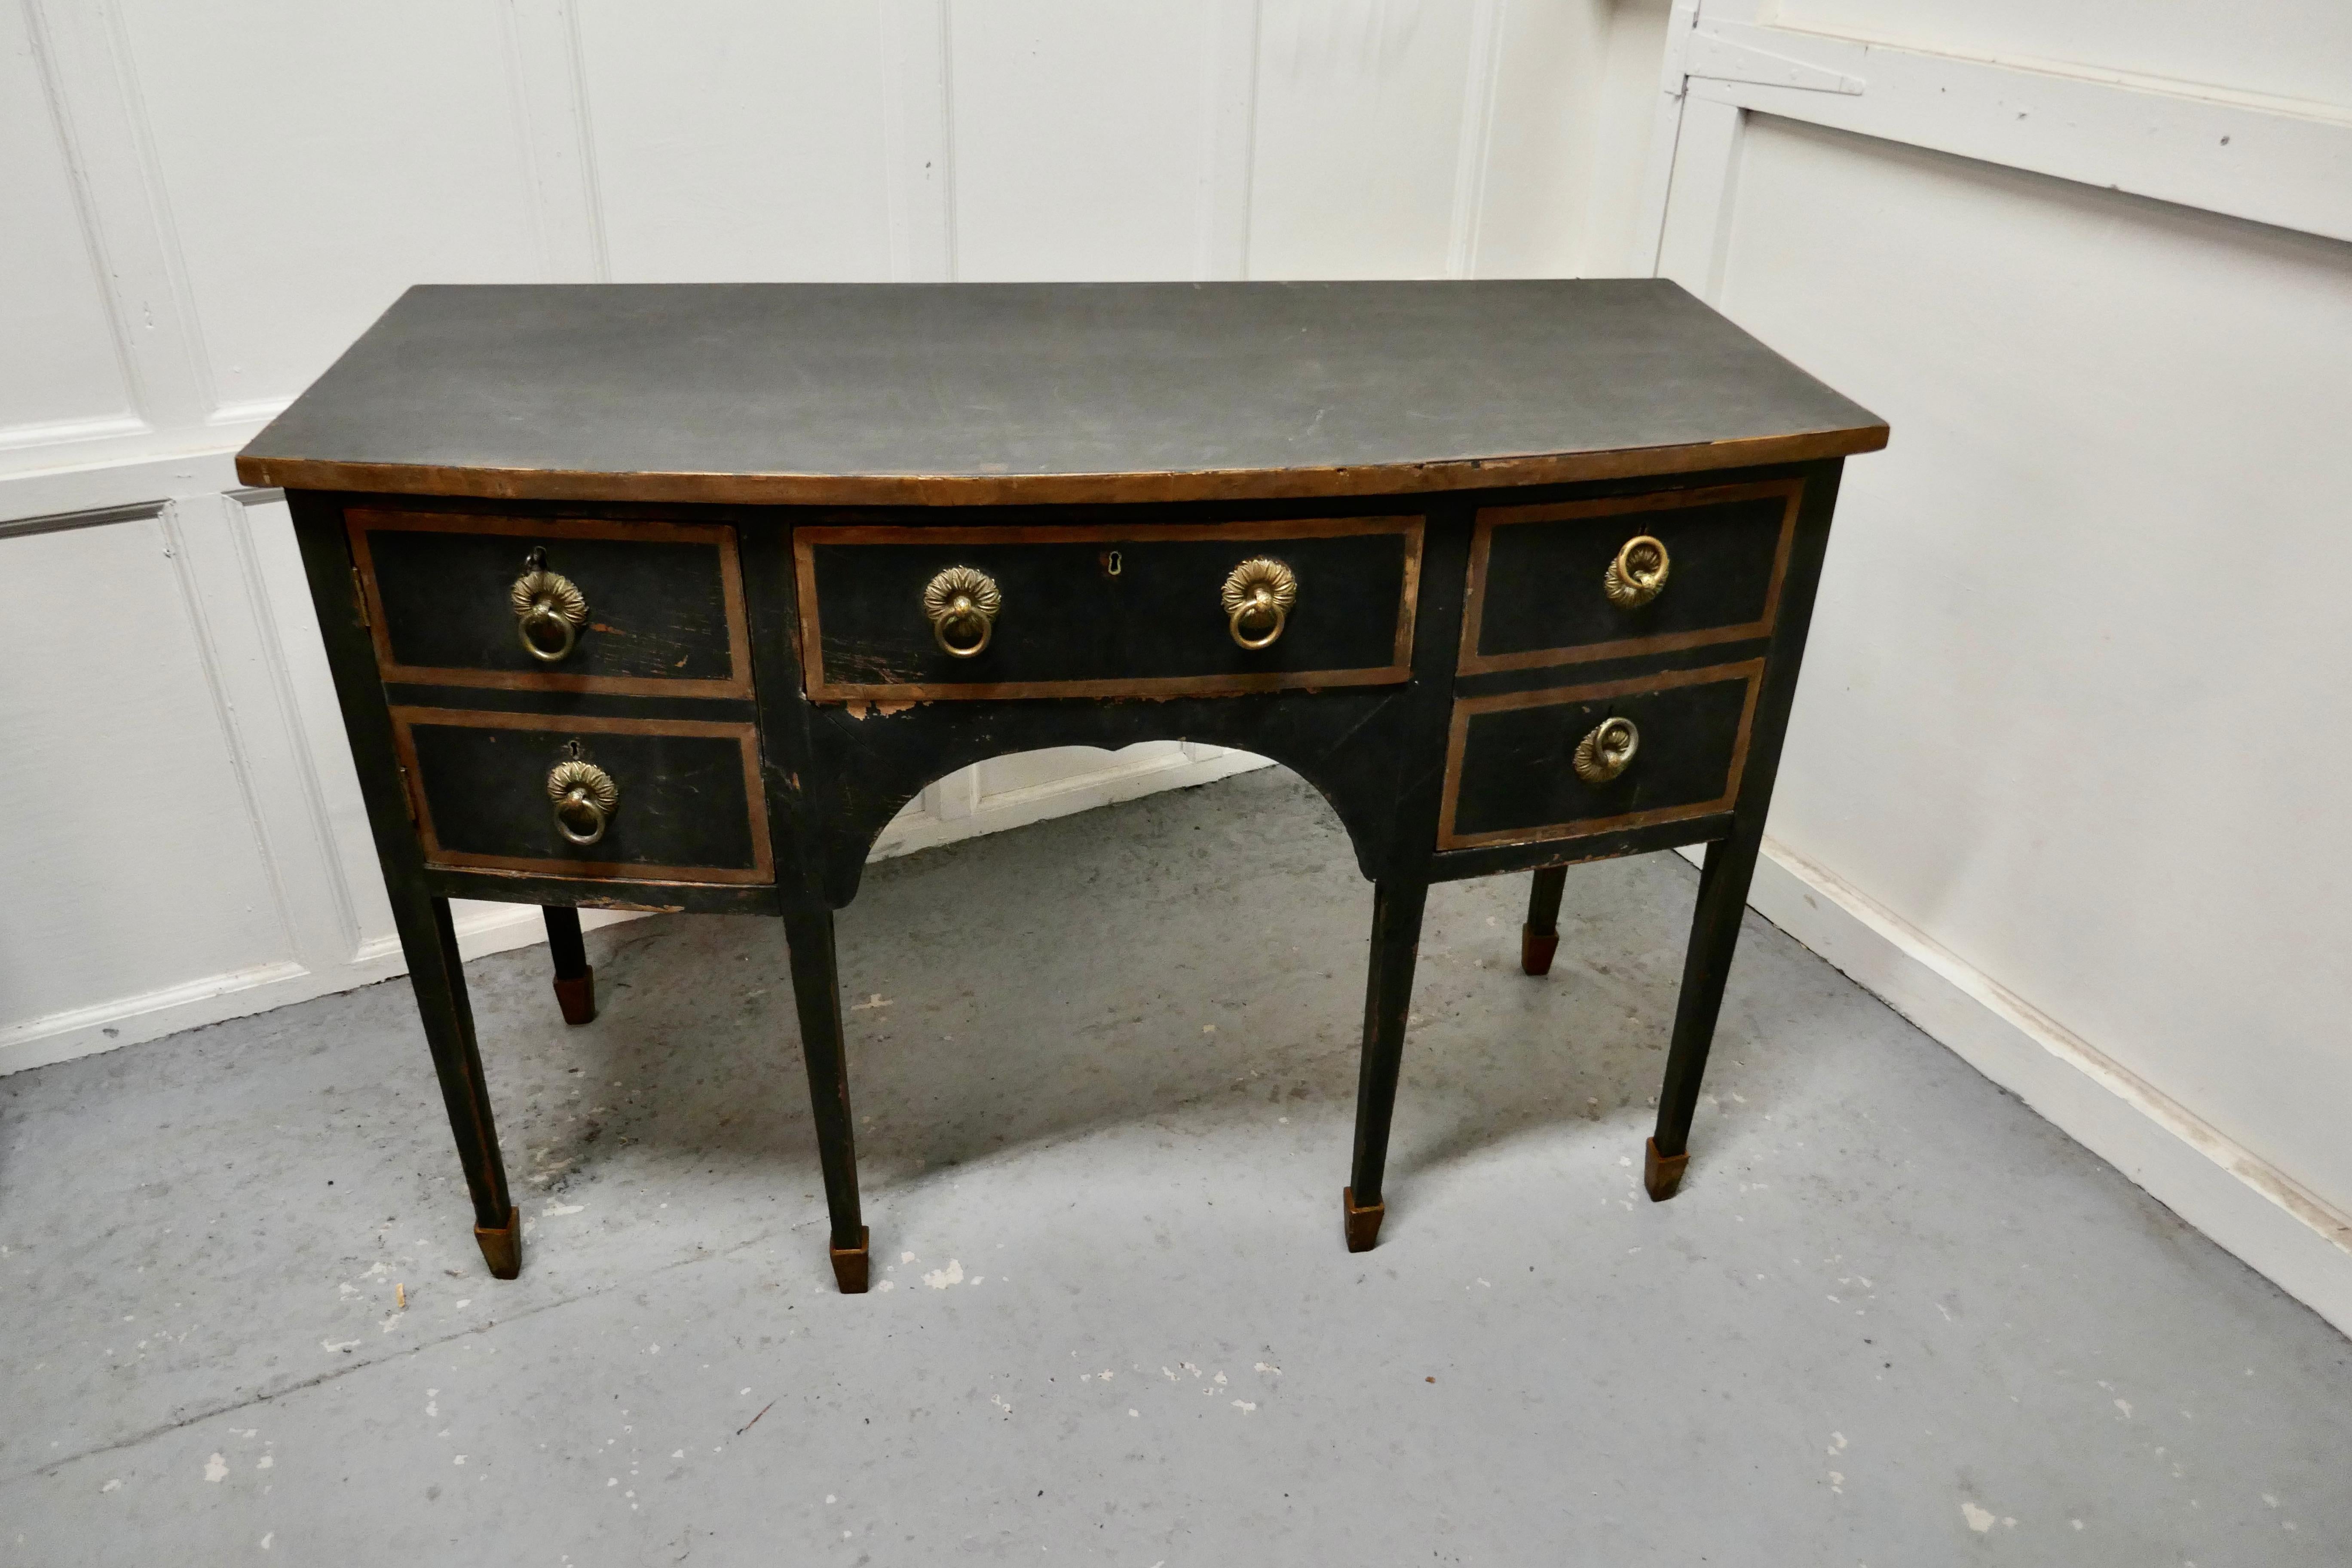 Black and gold Regency bow front serving table, with Cellerette

This very unusual piece has one central drawer, to the left and right sides it has 2 double drawer fronts, one is a large cupboard and the other is a double depth drawer originally